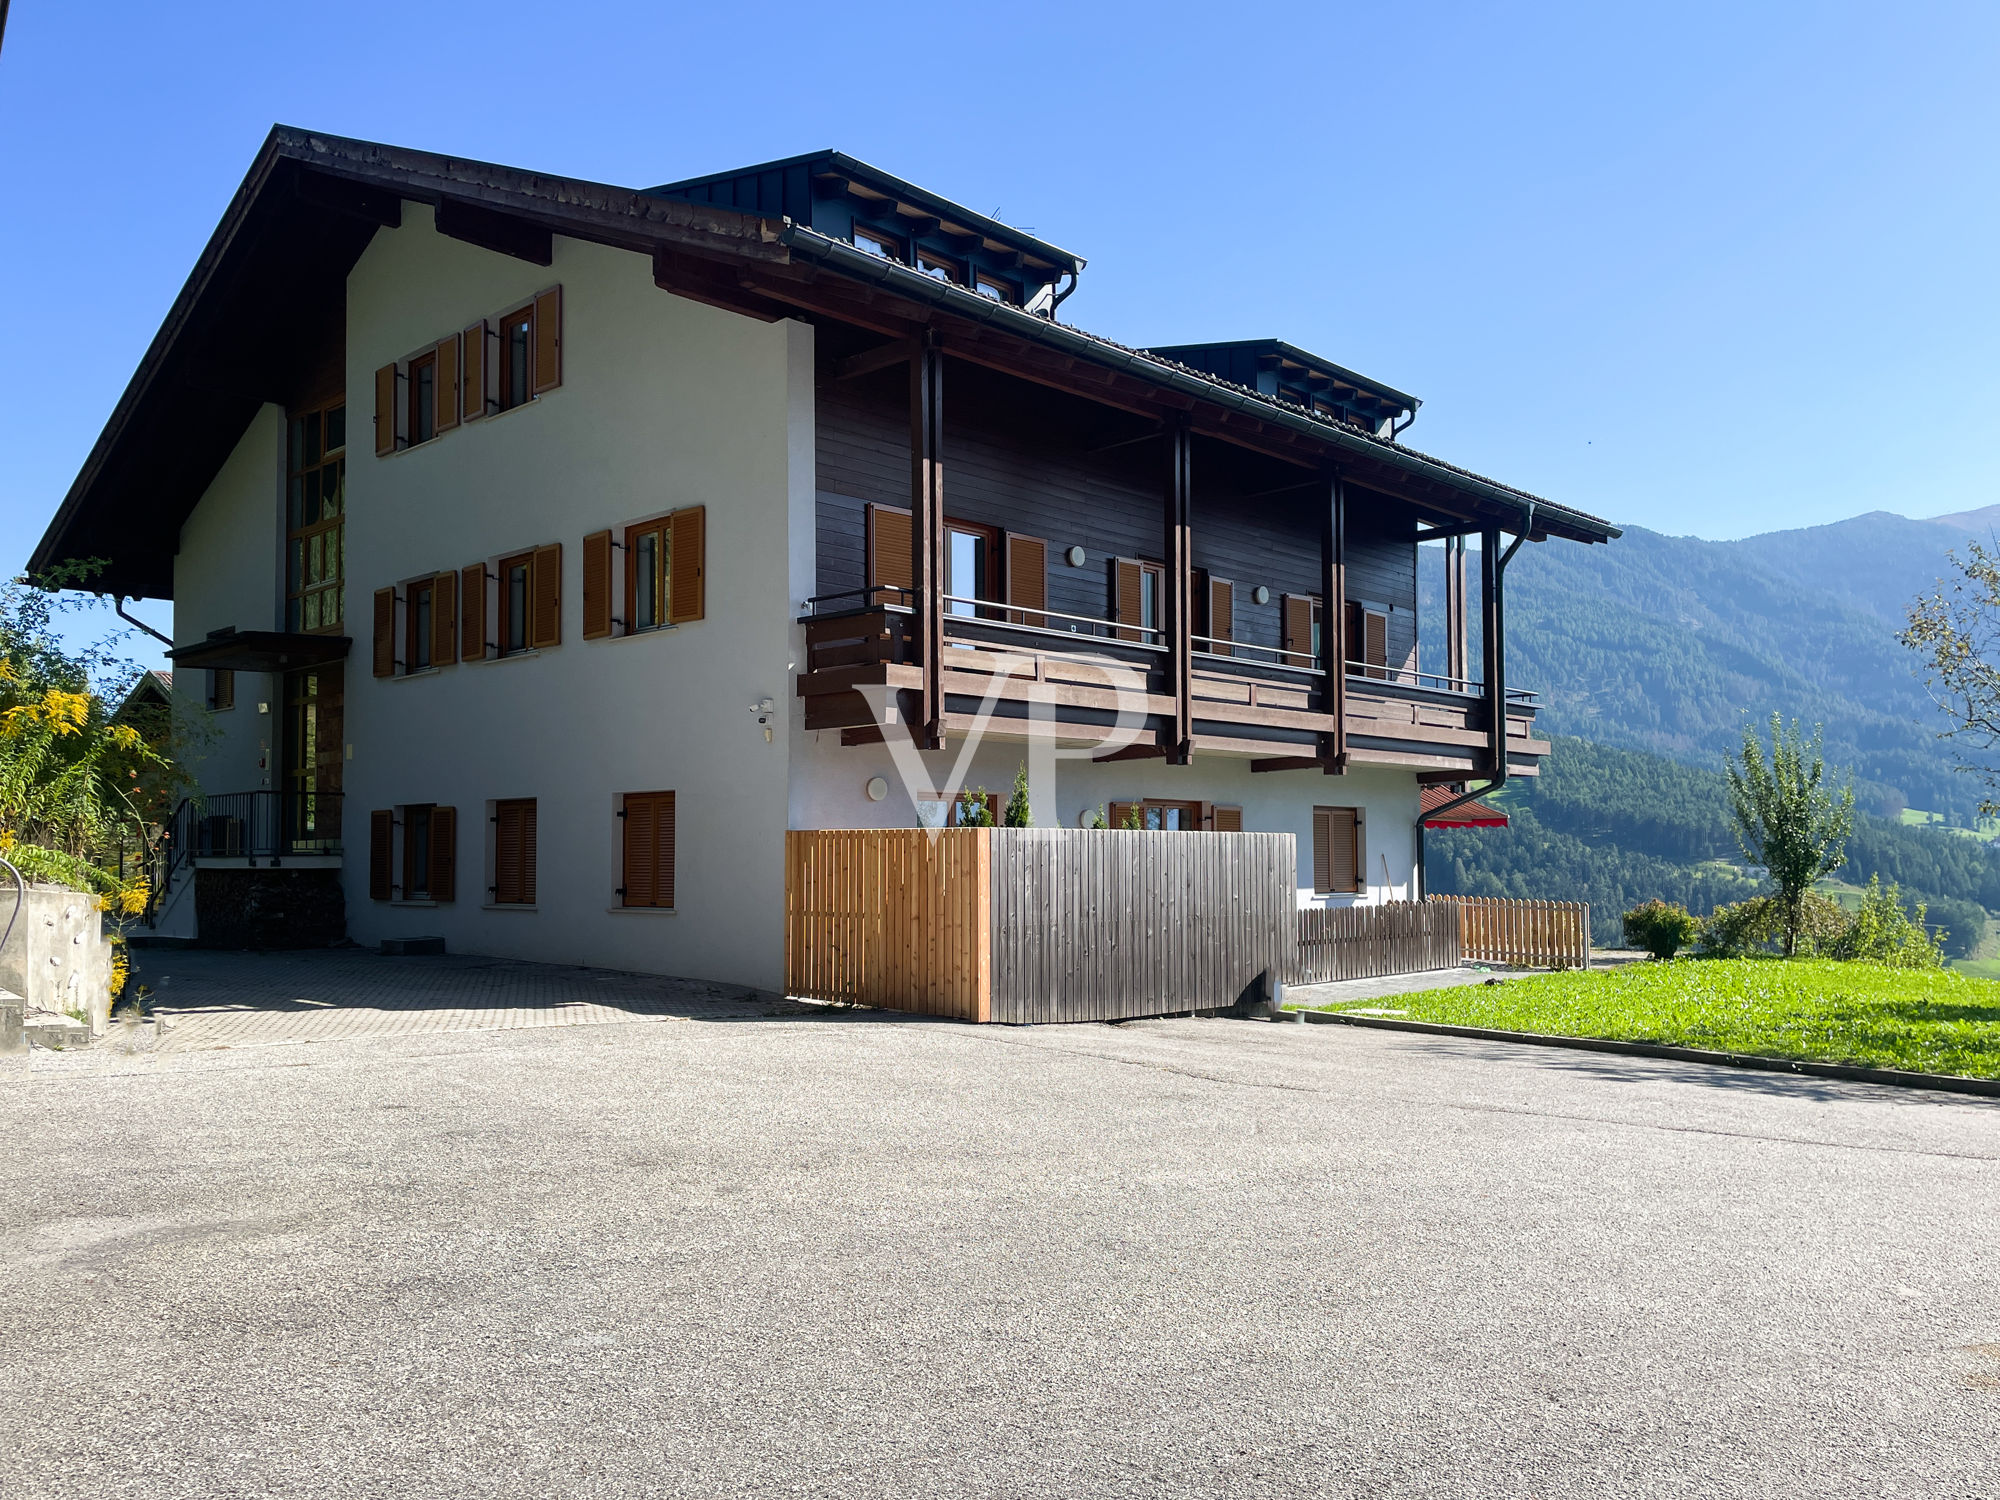 Kronplatz: Freshly renovated and furnished apartment in the beautiful Pustertal Valley.
